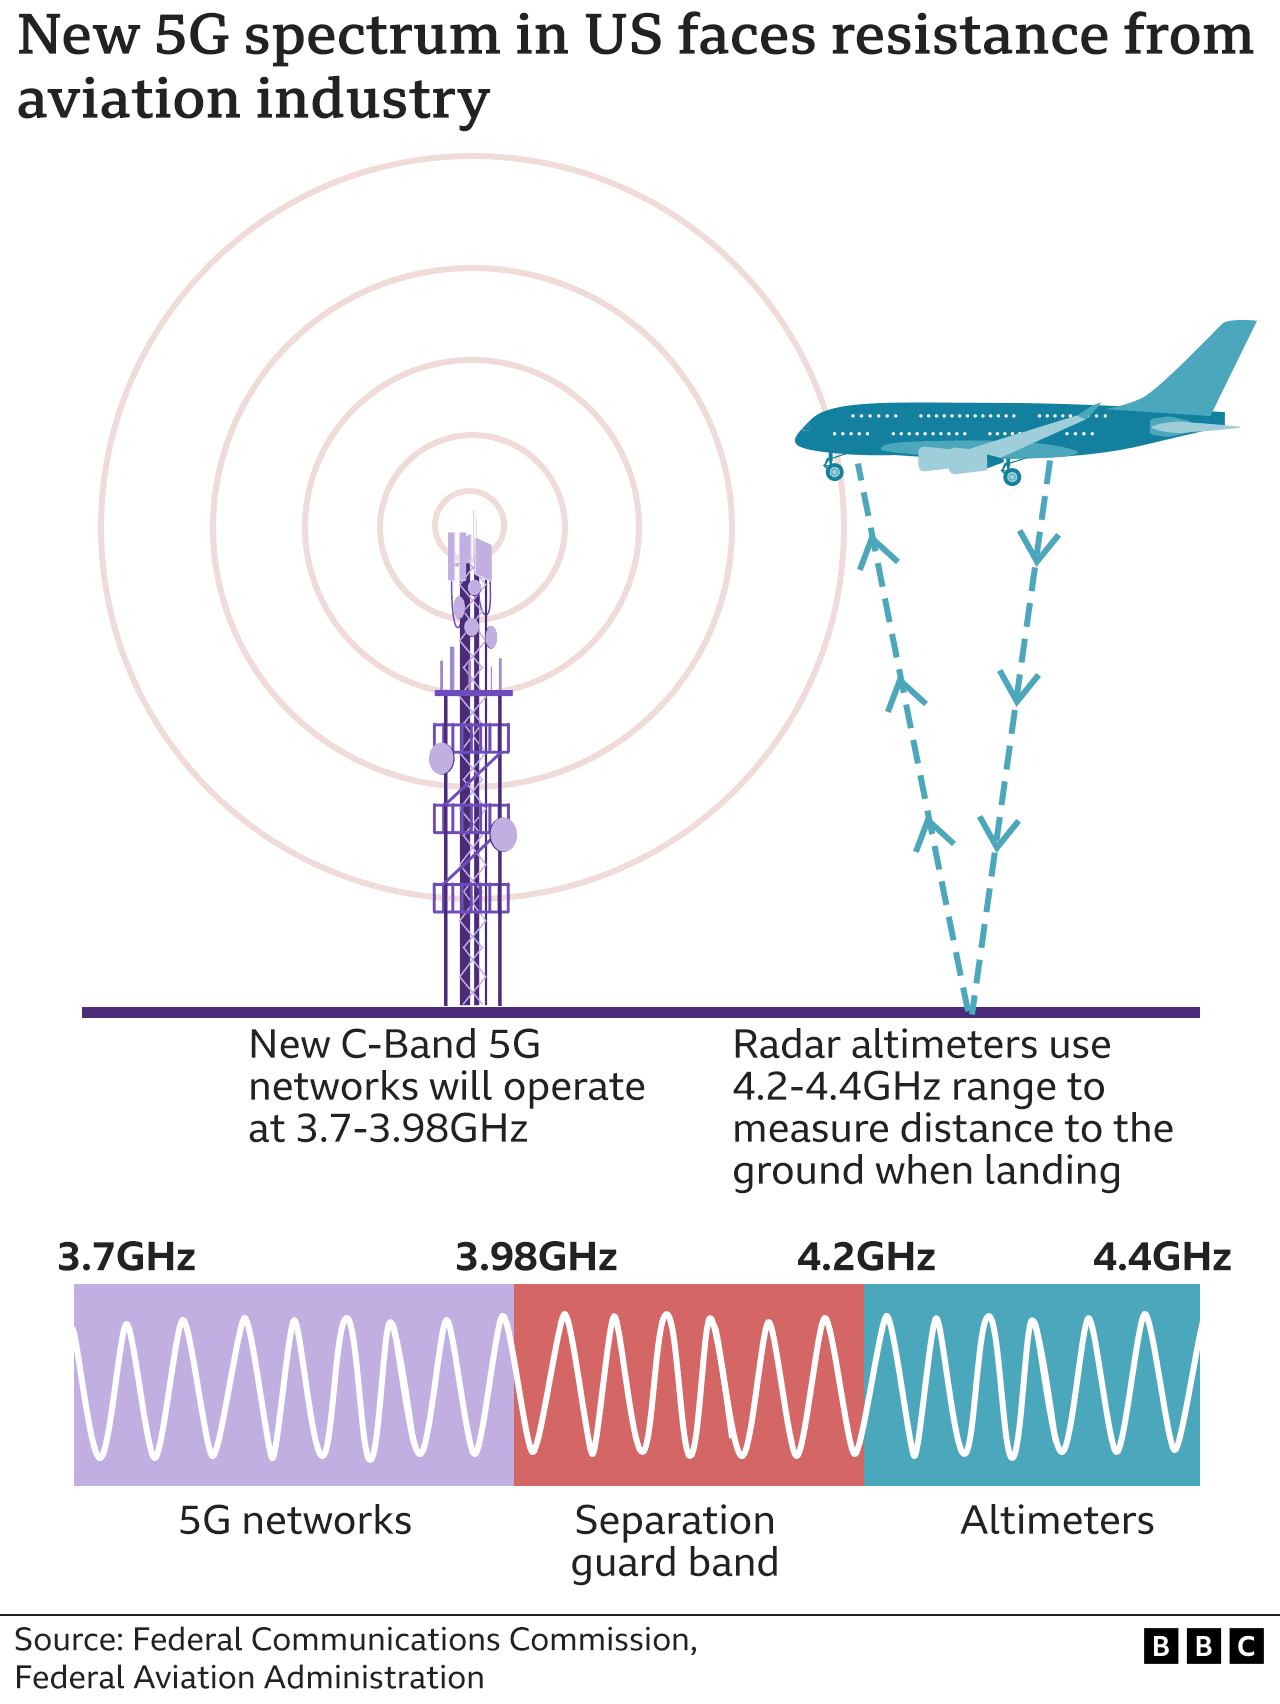 Illustration shows the frequencies of C-band 5G phone networks and radar altimeters in the US